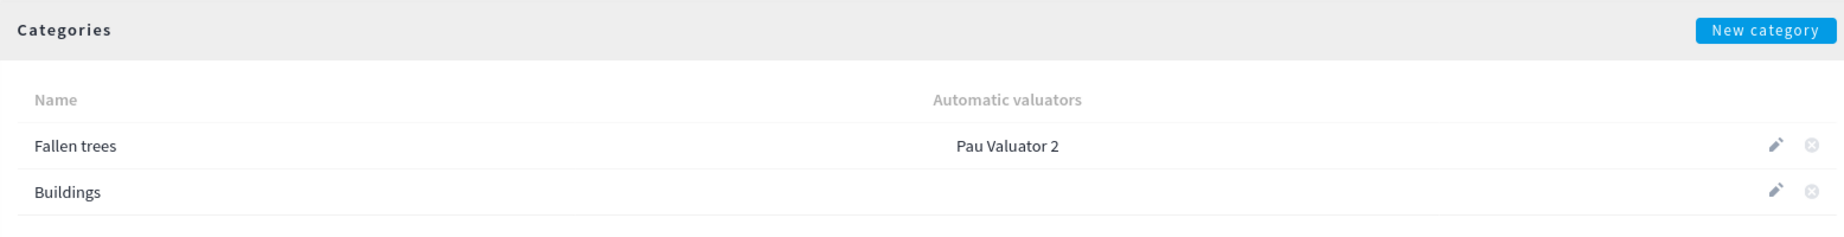 Assign categories automatically to valuators